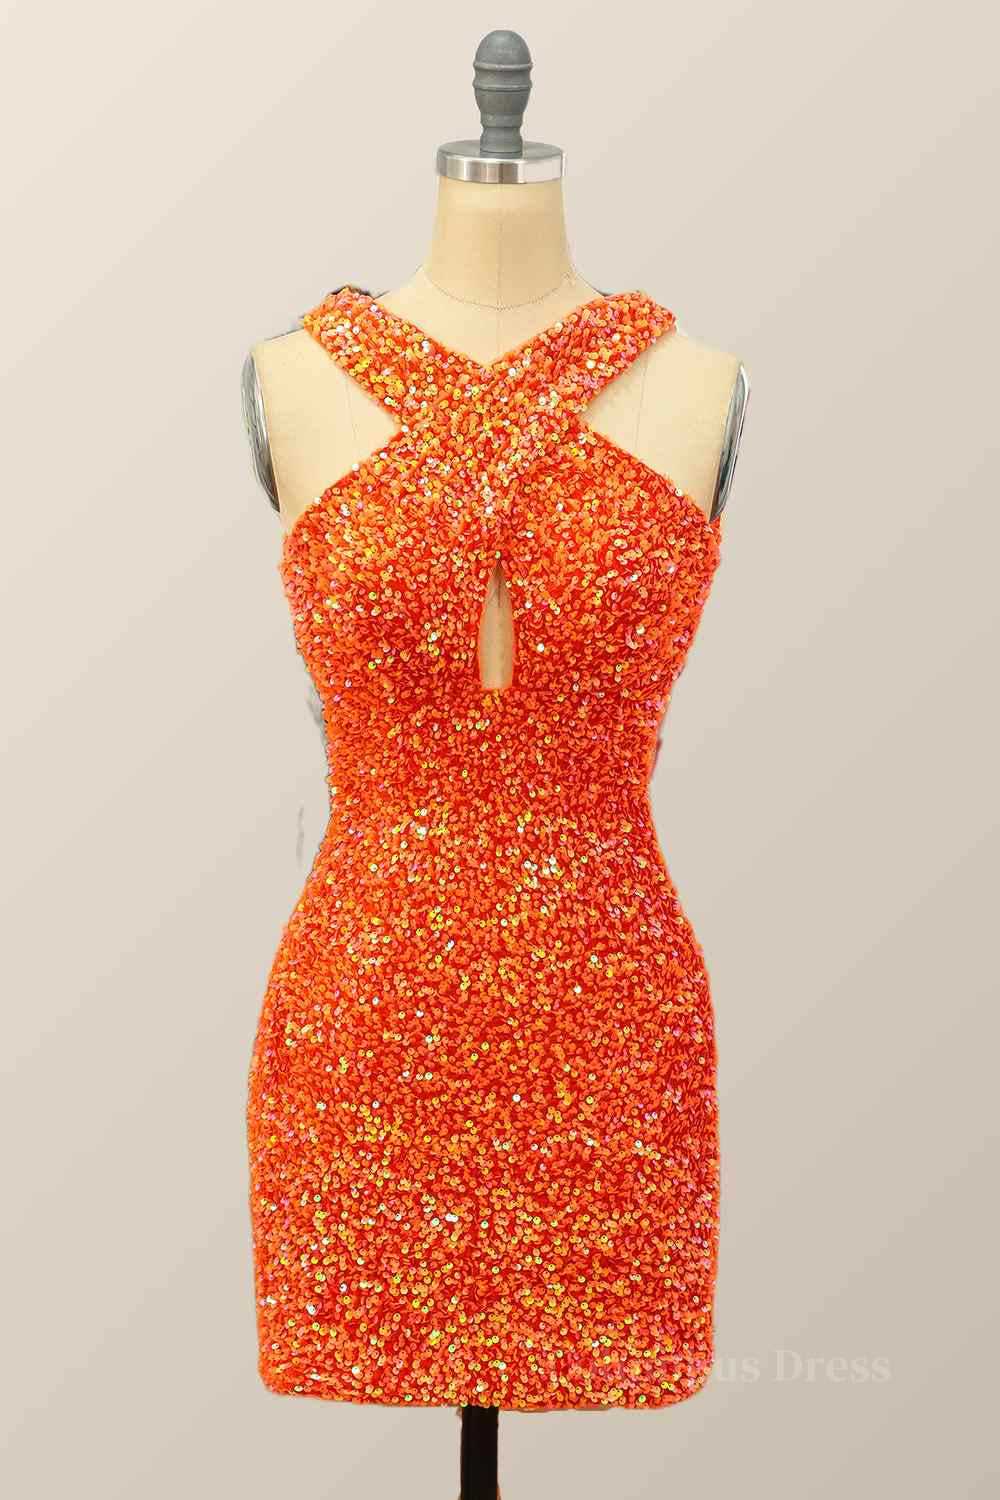 Formal Dress Wear For Ladies, Orange Sheath Halter Sequins Cut-Out Mini Homecoming Dress